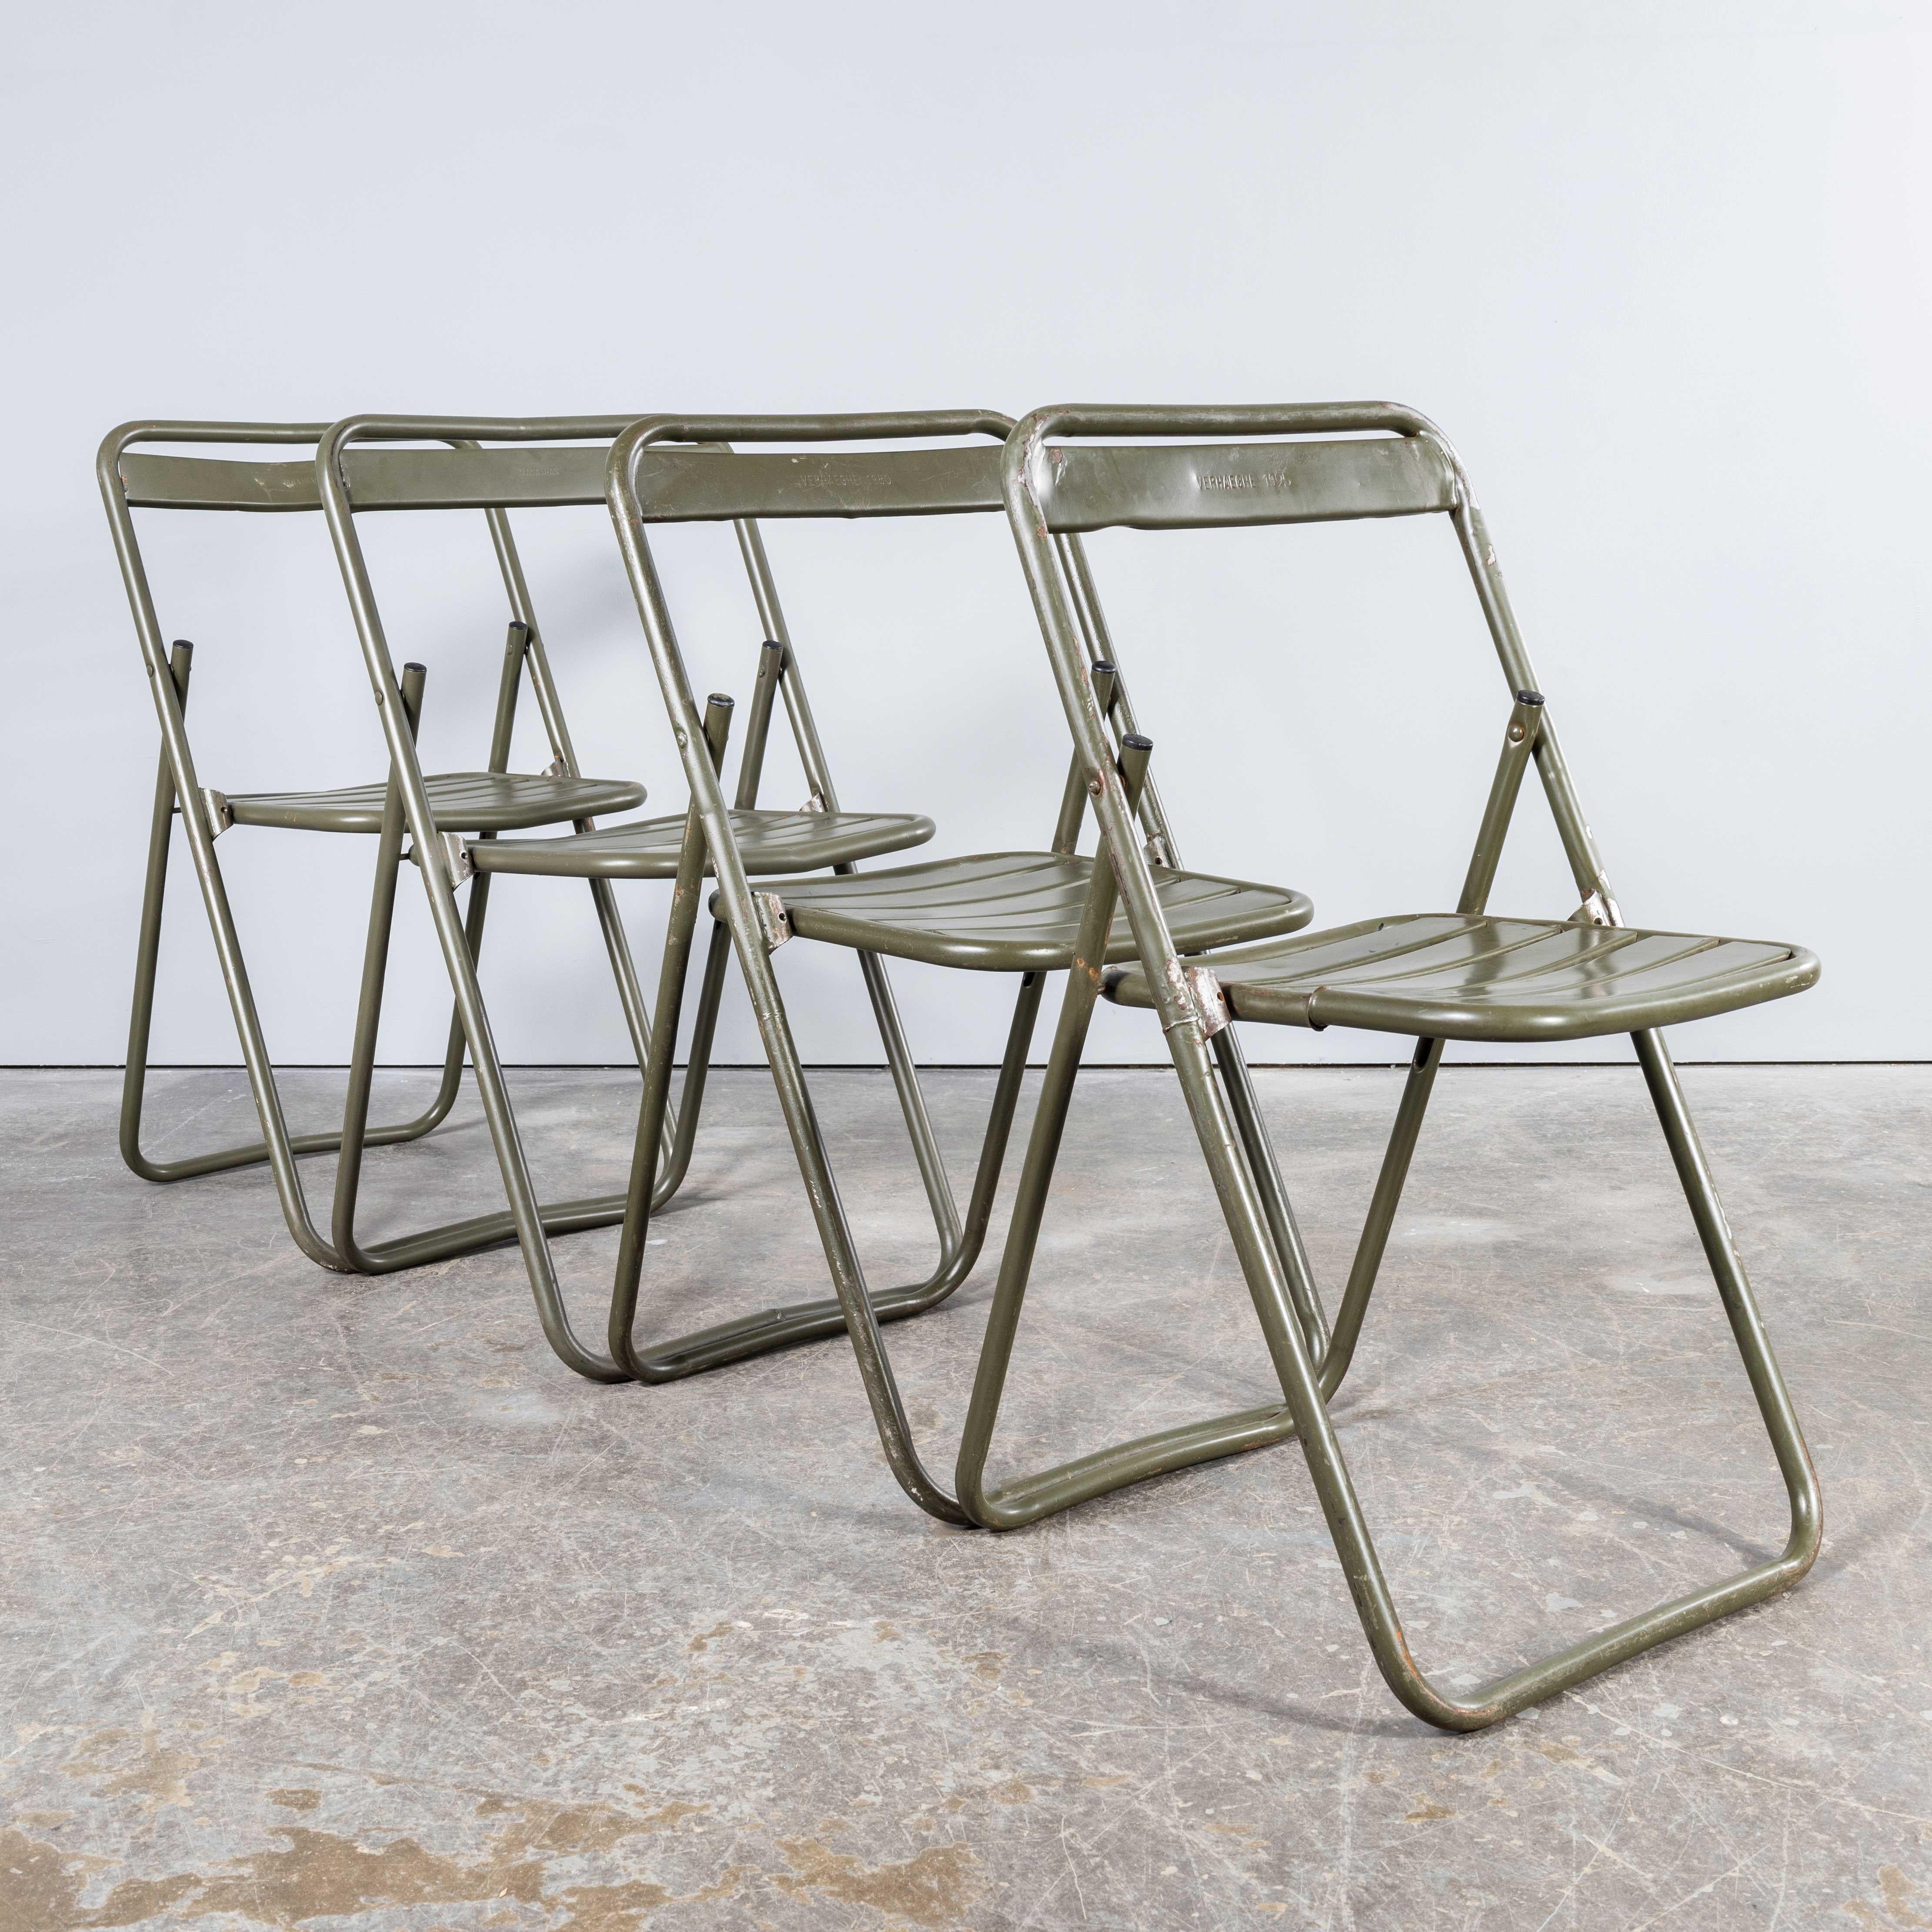 1970's New Old Stock Original French Army Surplus Folding Chairs - Very Large Qu For Sale 7